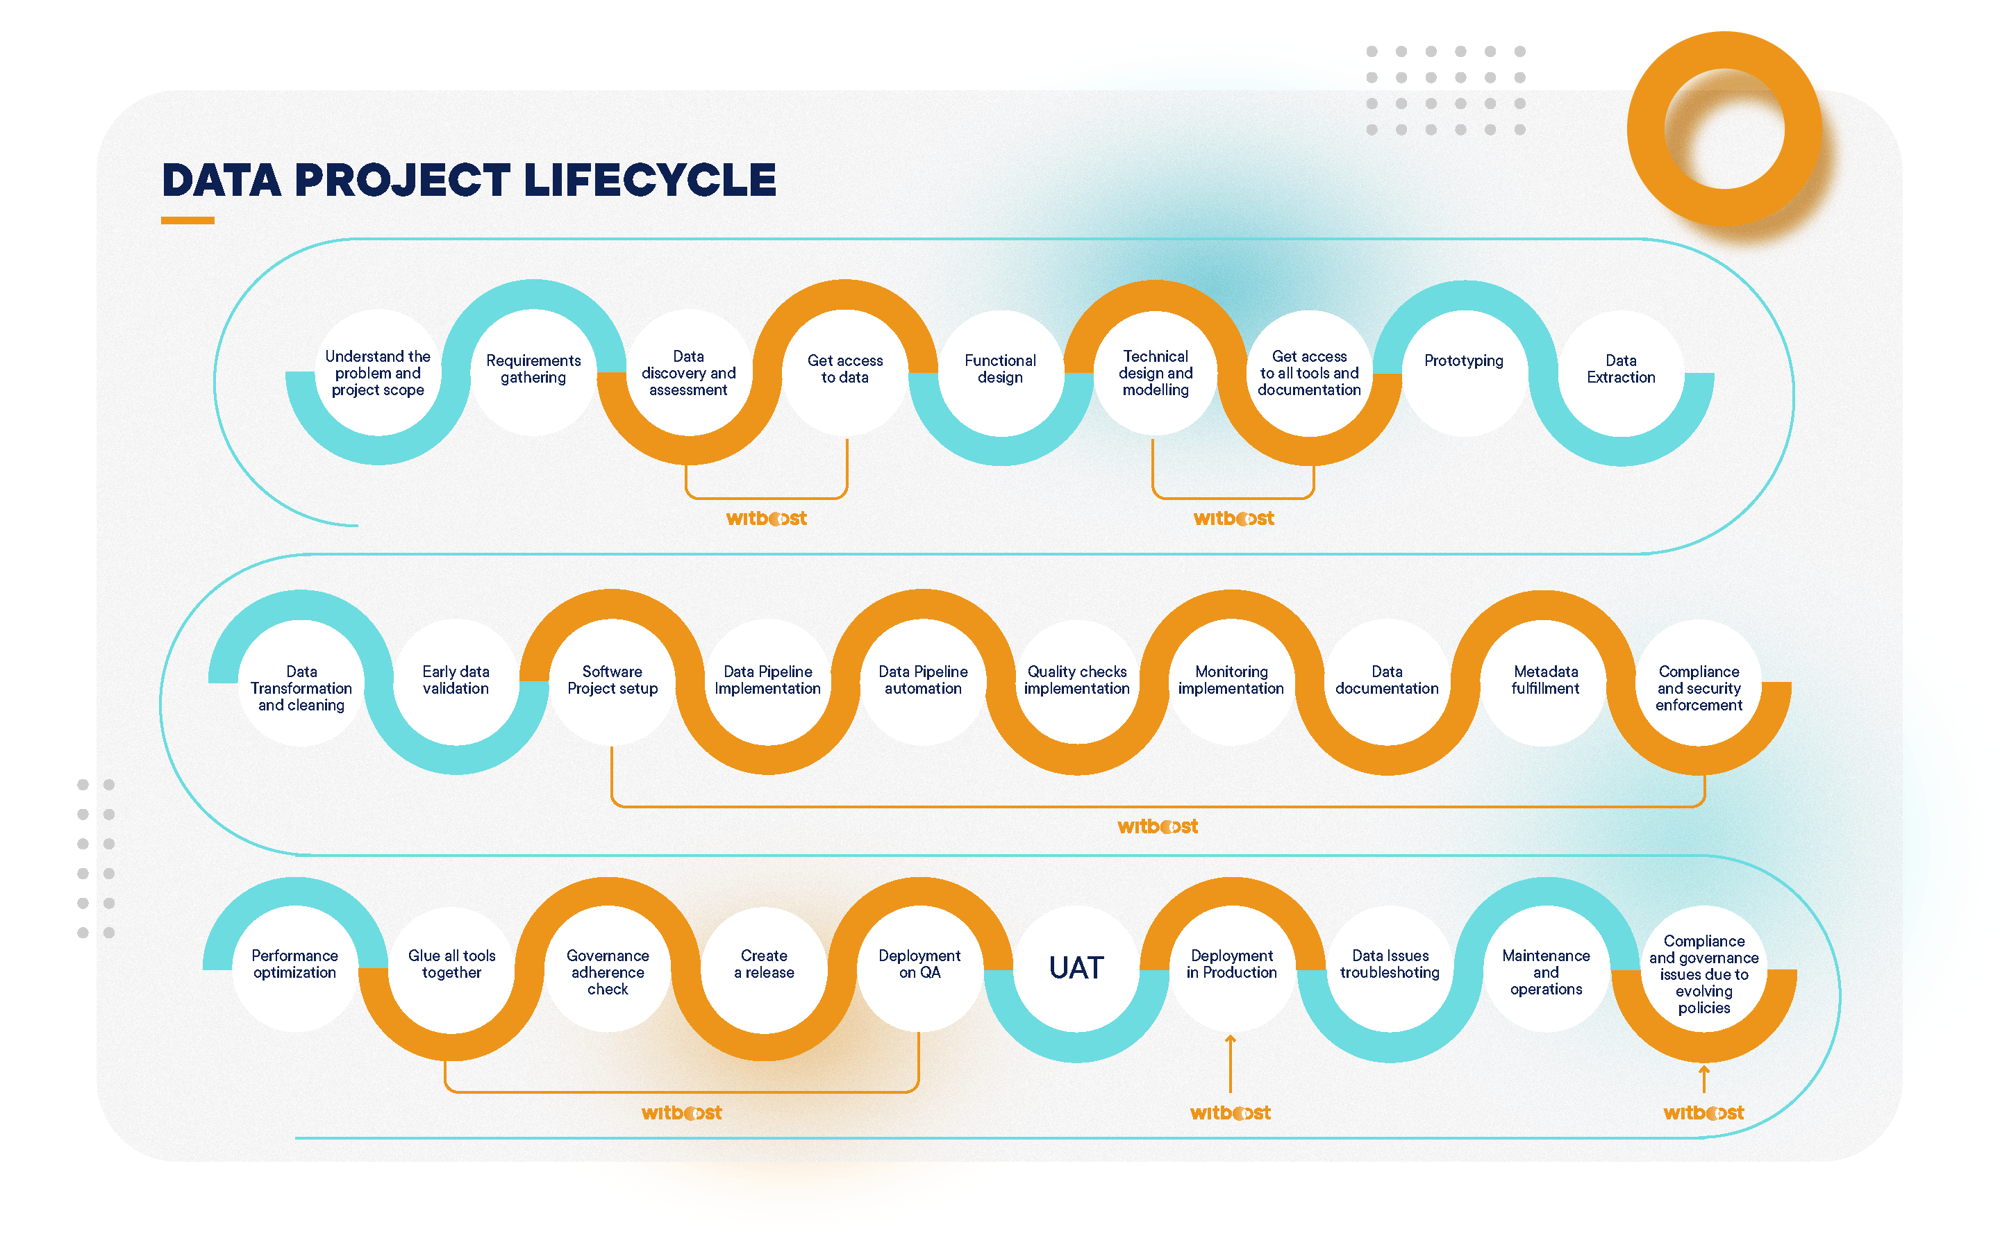 DATA PROJECT LIFECYCLE